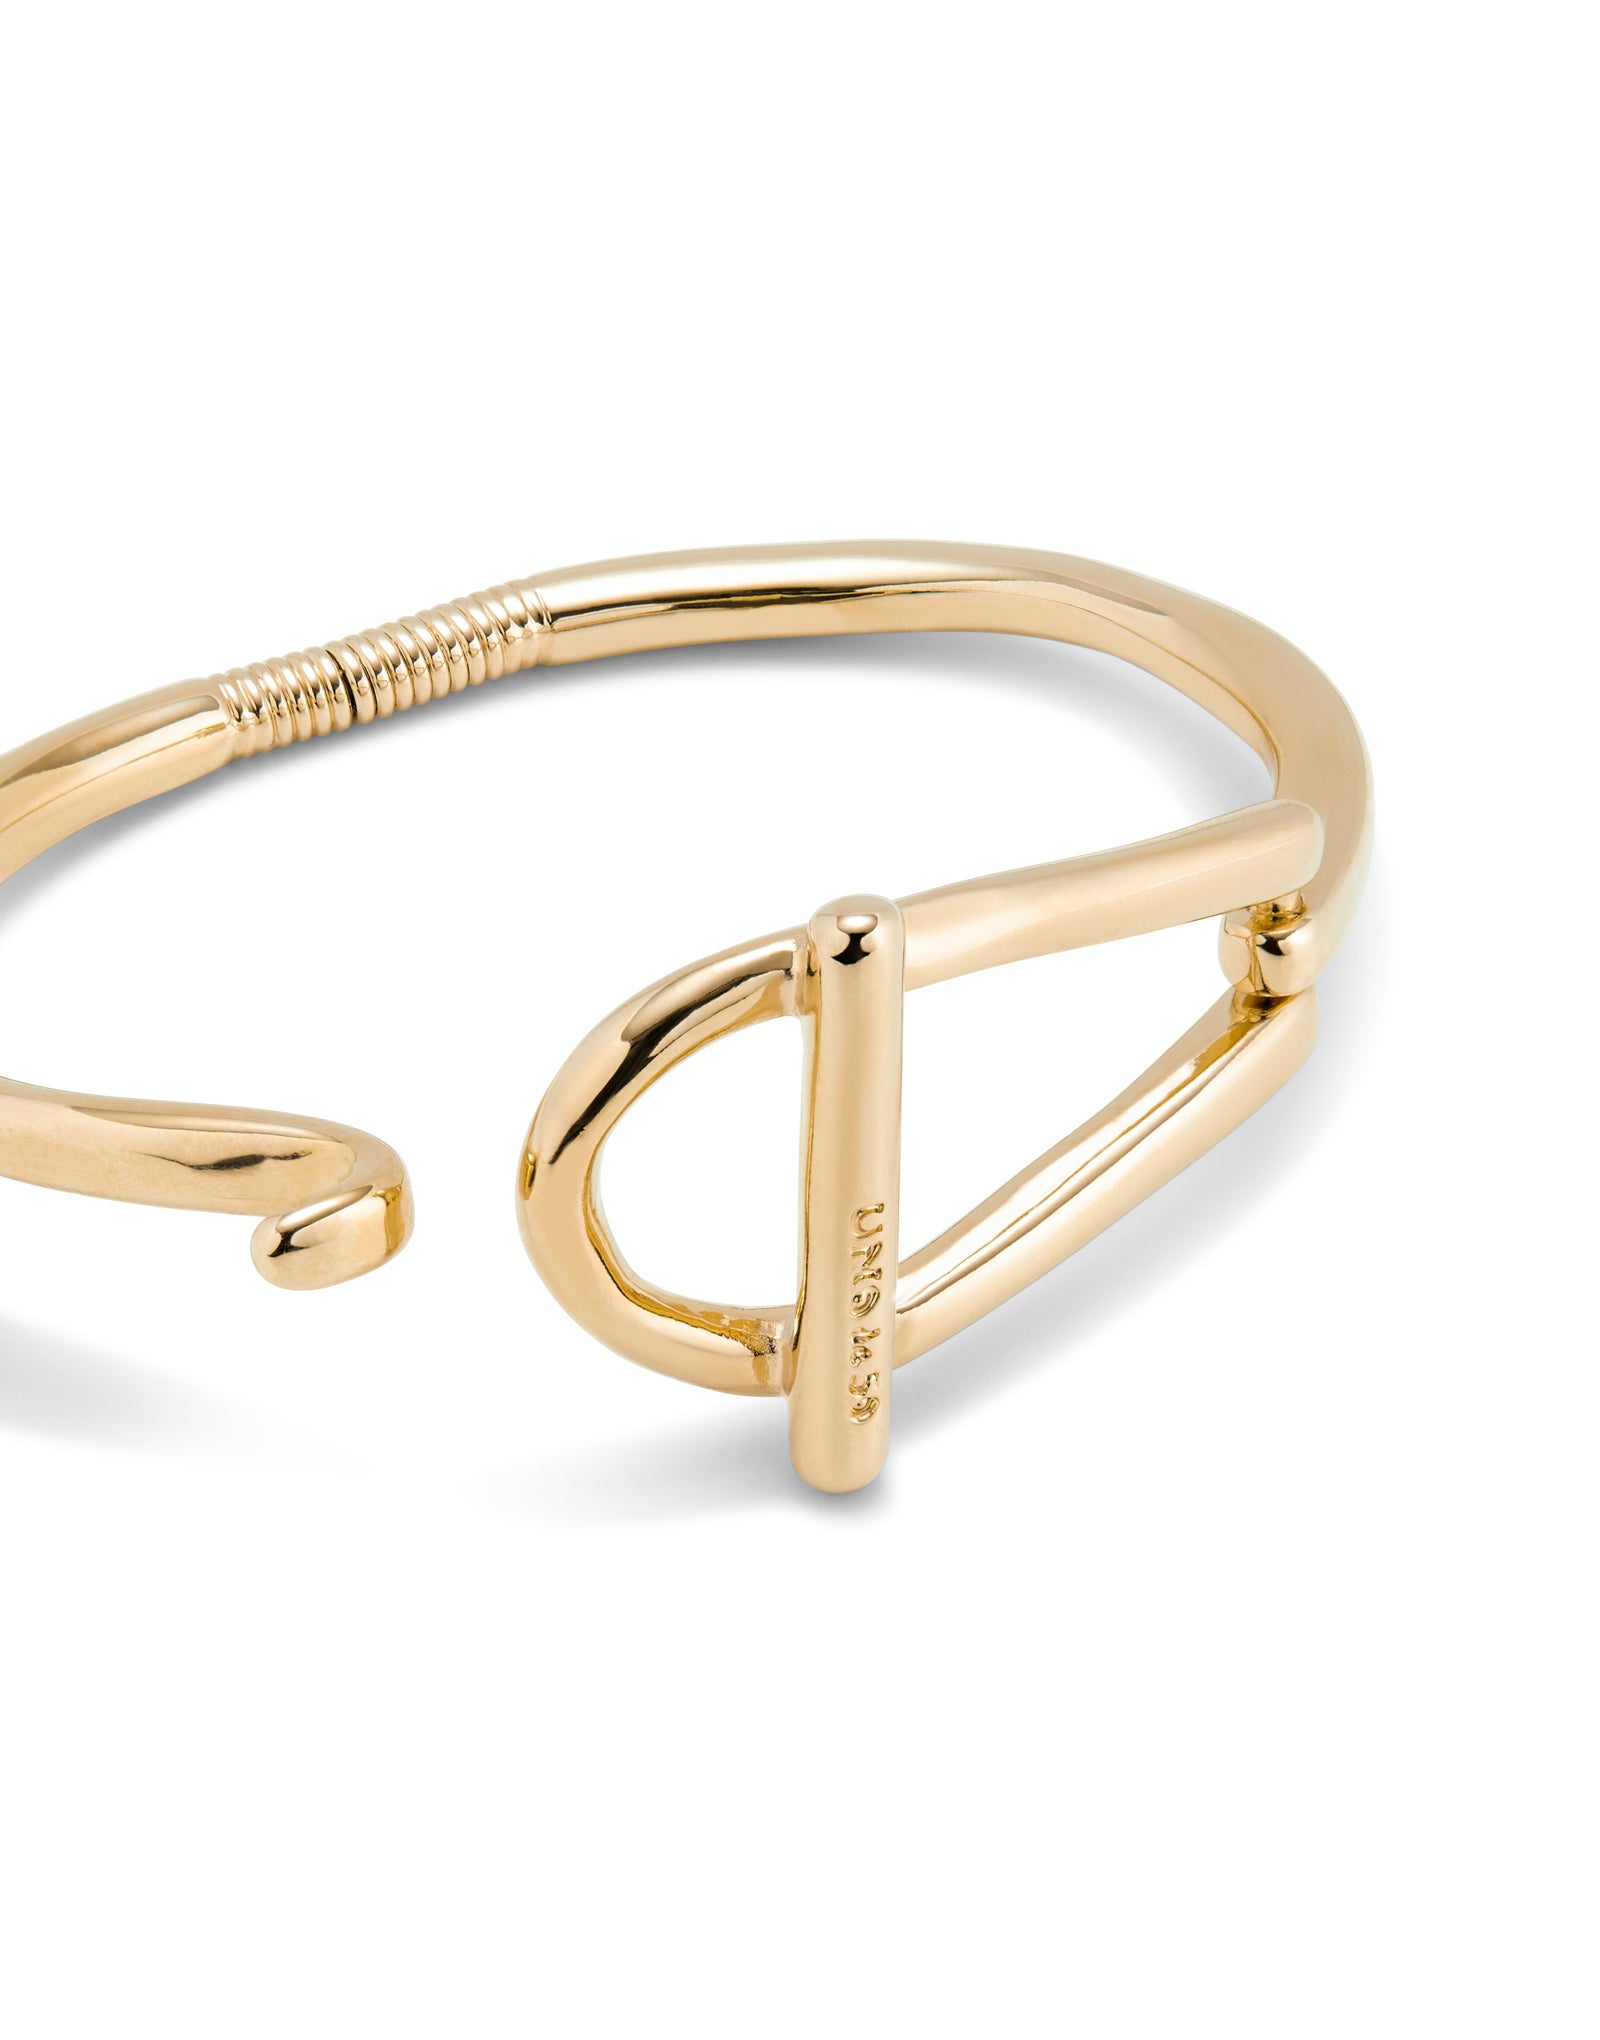 YOUNGSTER BRACELET - UNO DE 50 - GOLD PLATE